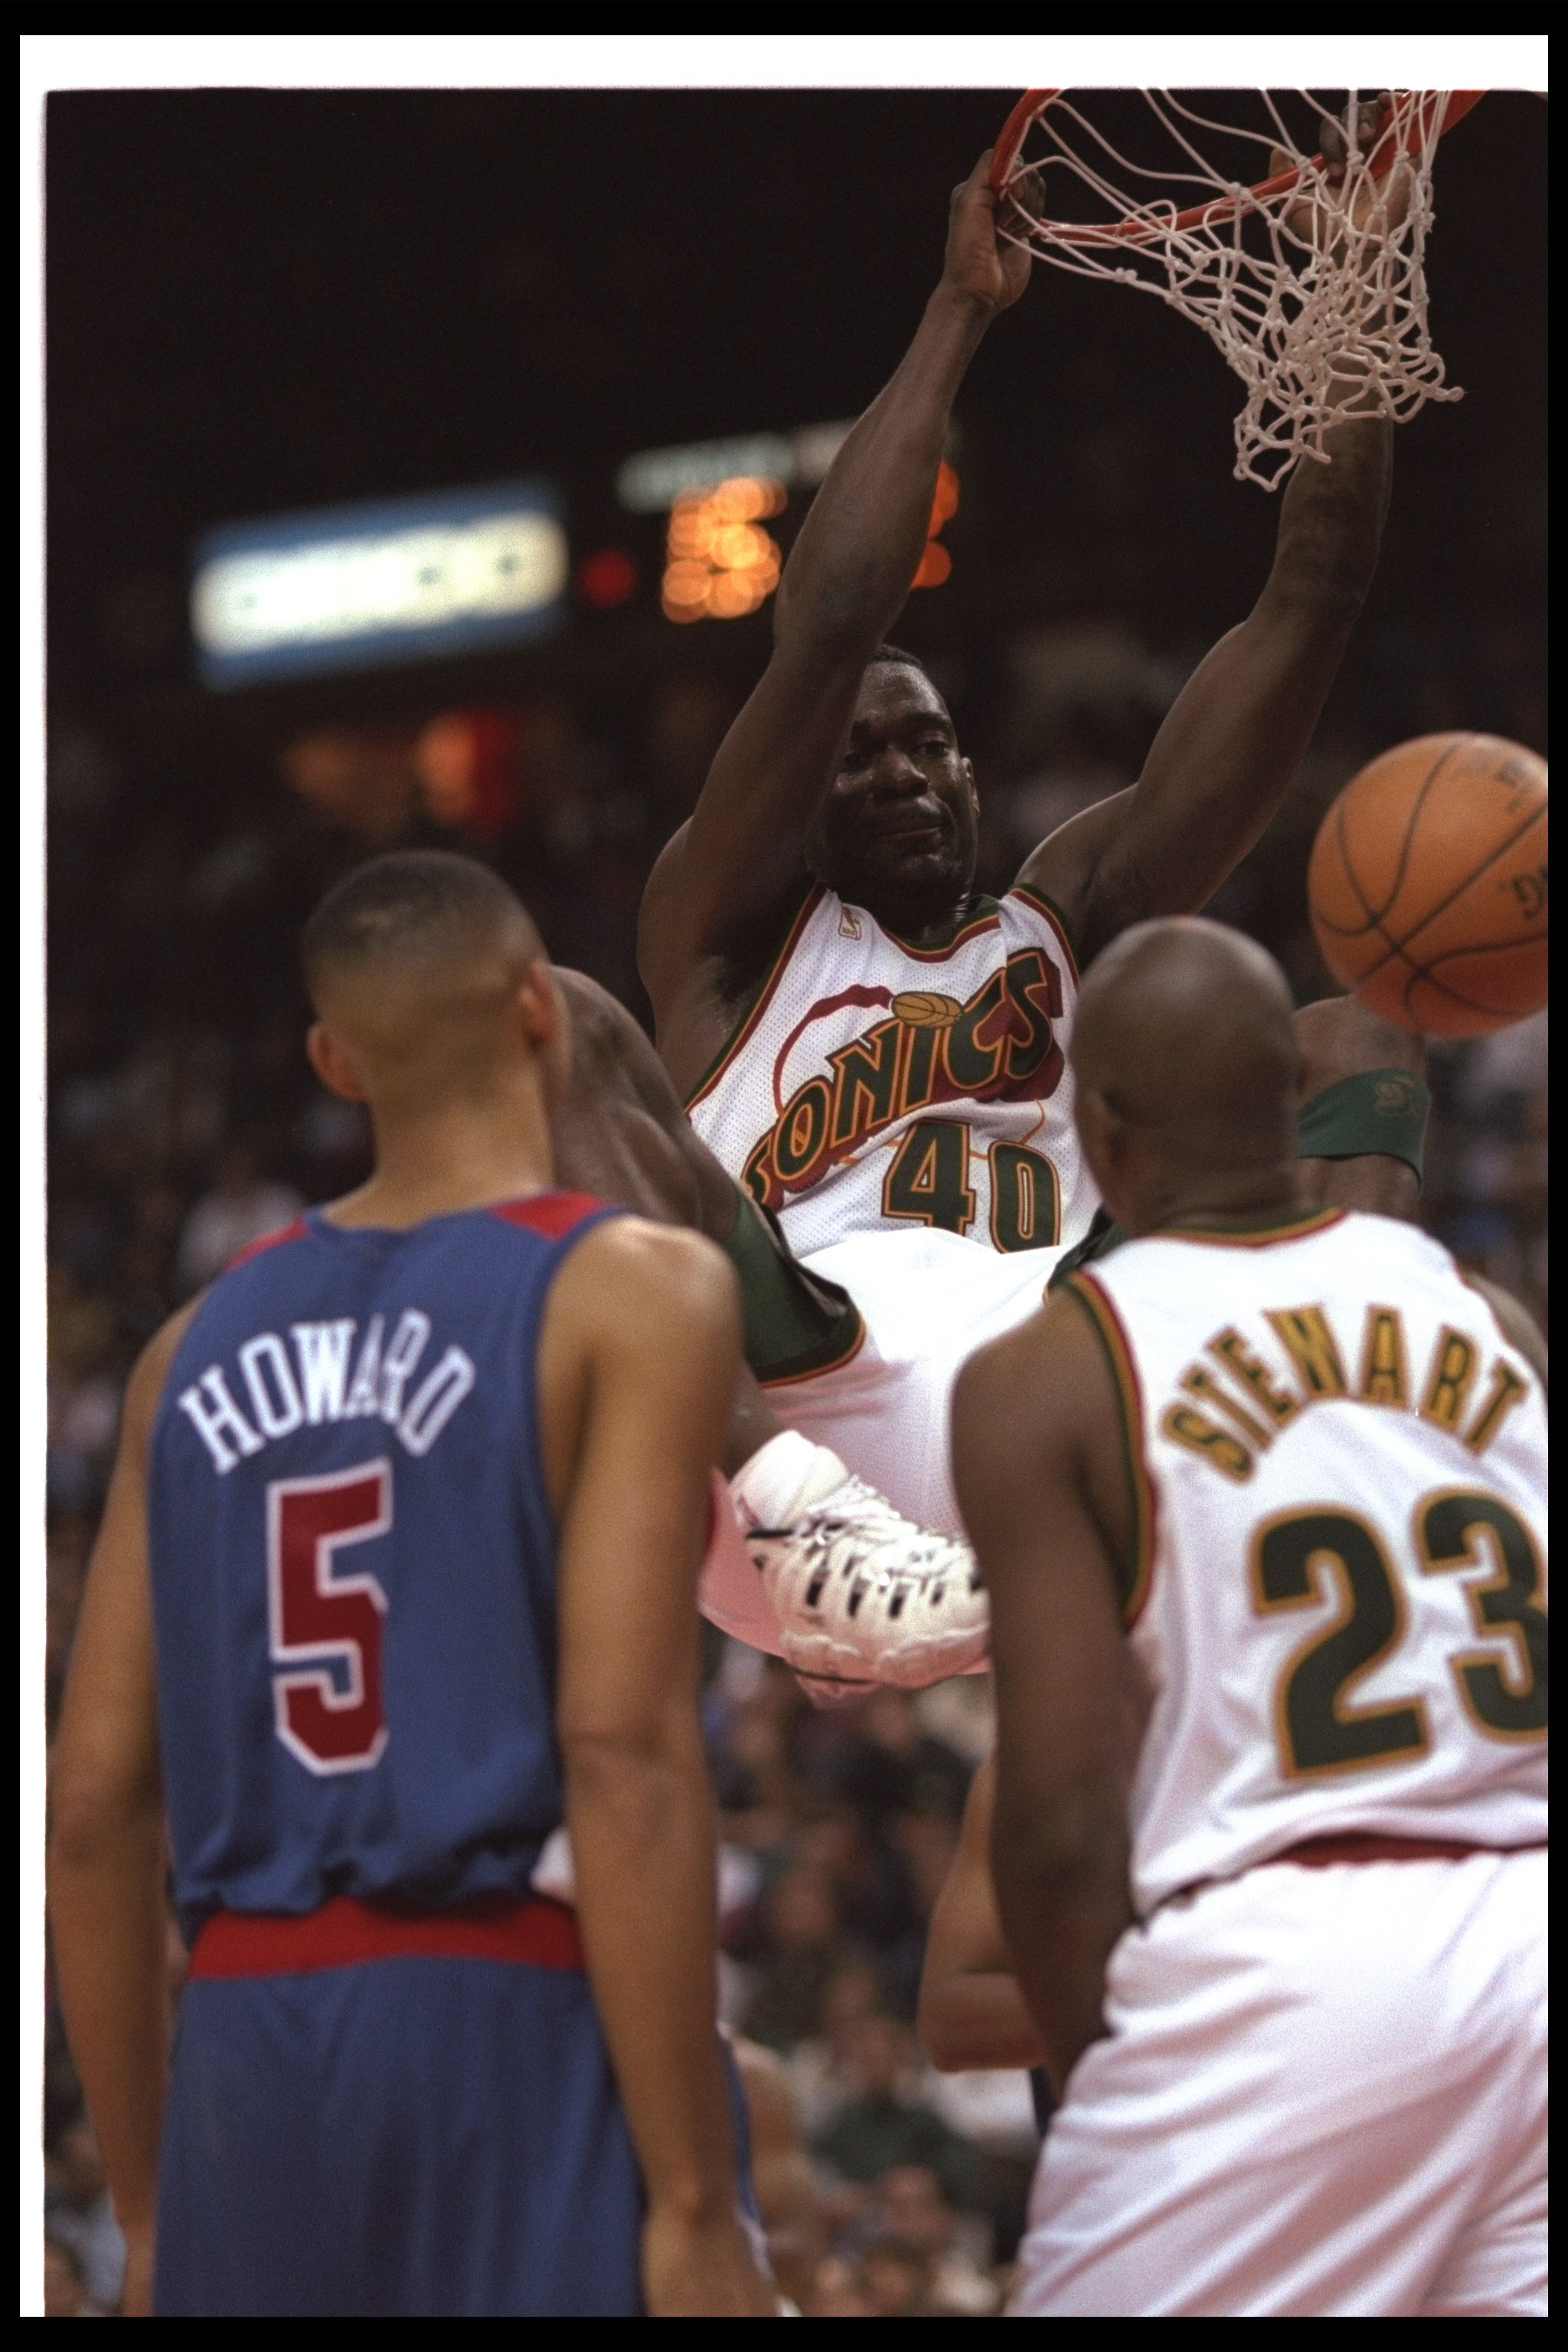 WATCH: Shawn Kemp blindly dunks right through defender!